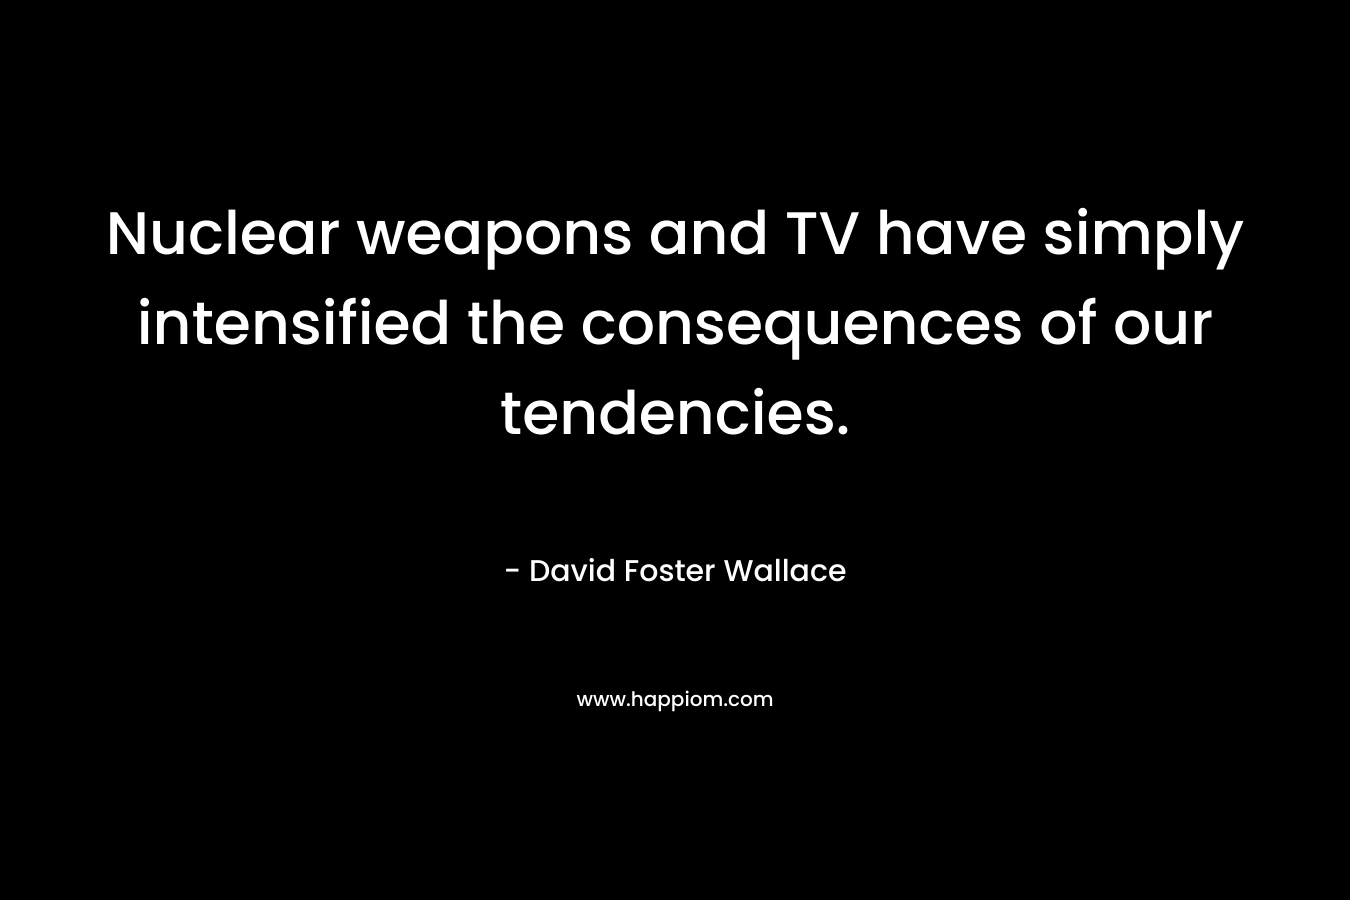 Nuclear weapons and TV have simply intensified the consequences of our tendencies.